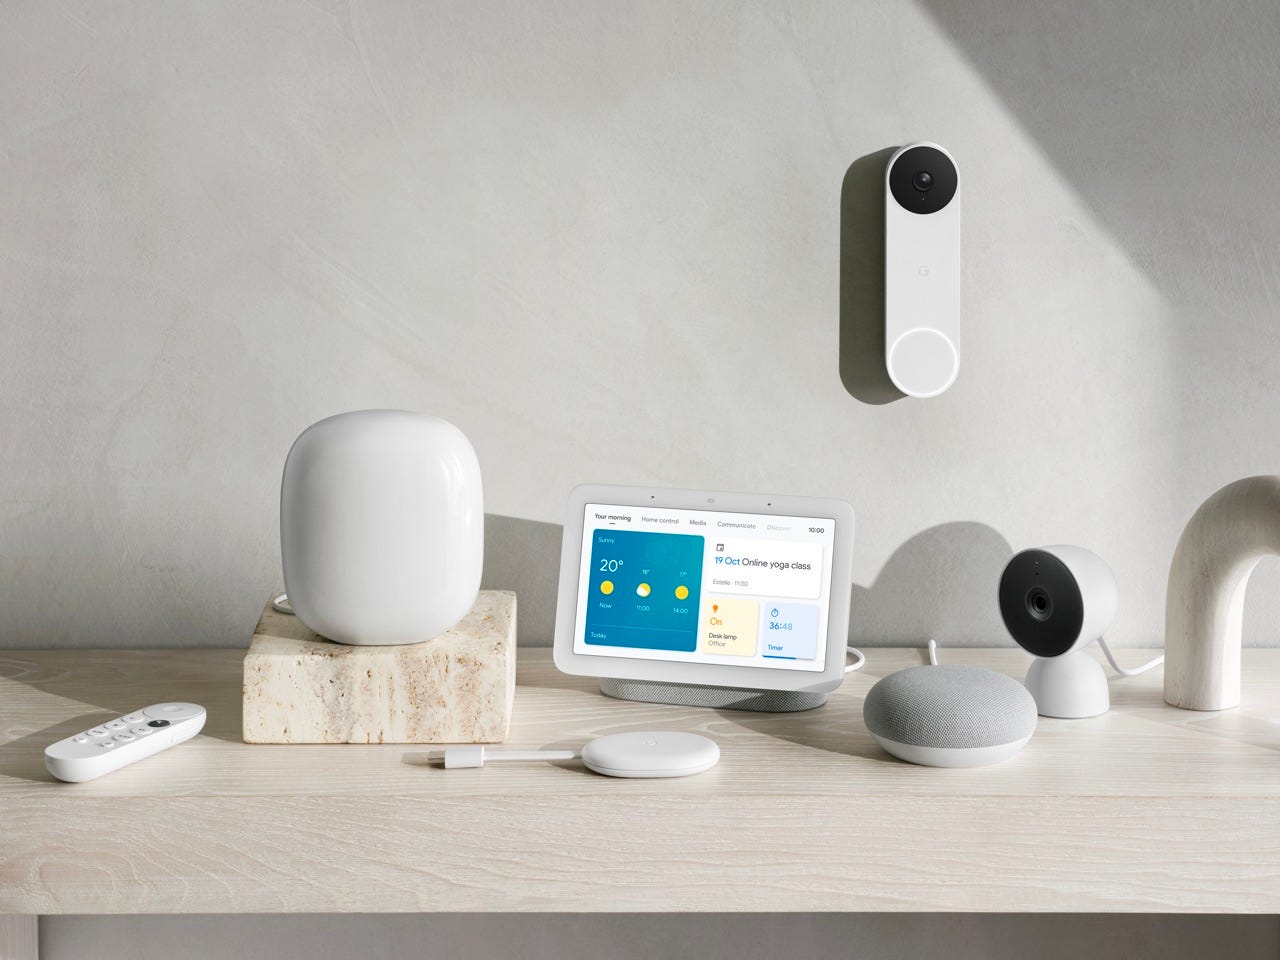 Google devices on a table and on the wall.